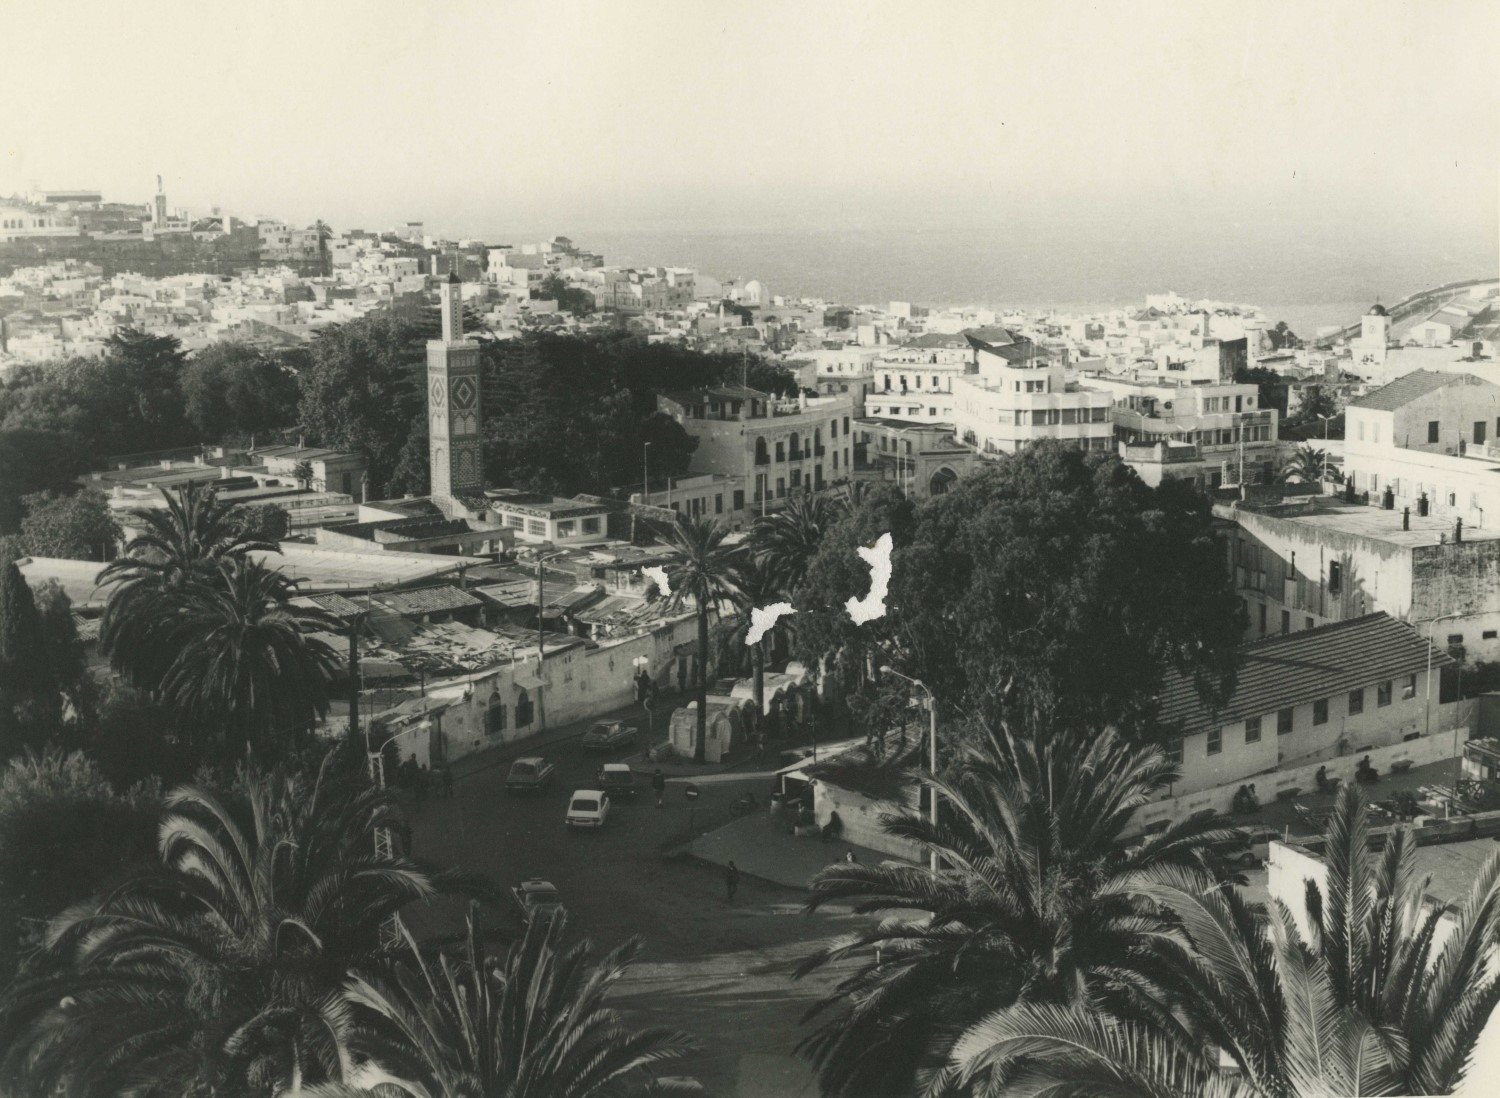 <p>View from above of Tangier toward the port. The minaret of Sidi Bou Abib slightly is to the left of the image center, the minaret of Jami' al-Jadid to the rear left of the image, and the Iglesia de la Purísima Concepción to the far right.</p>